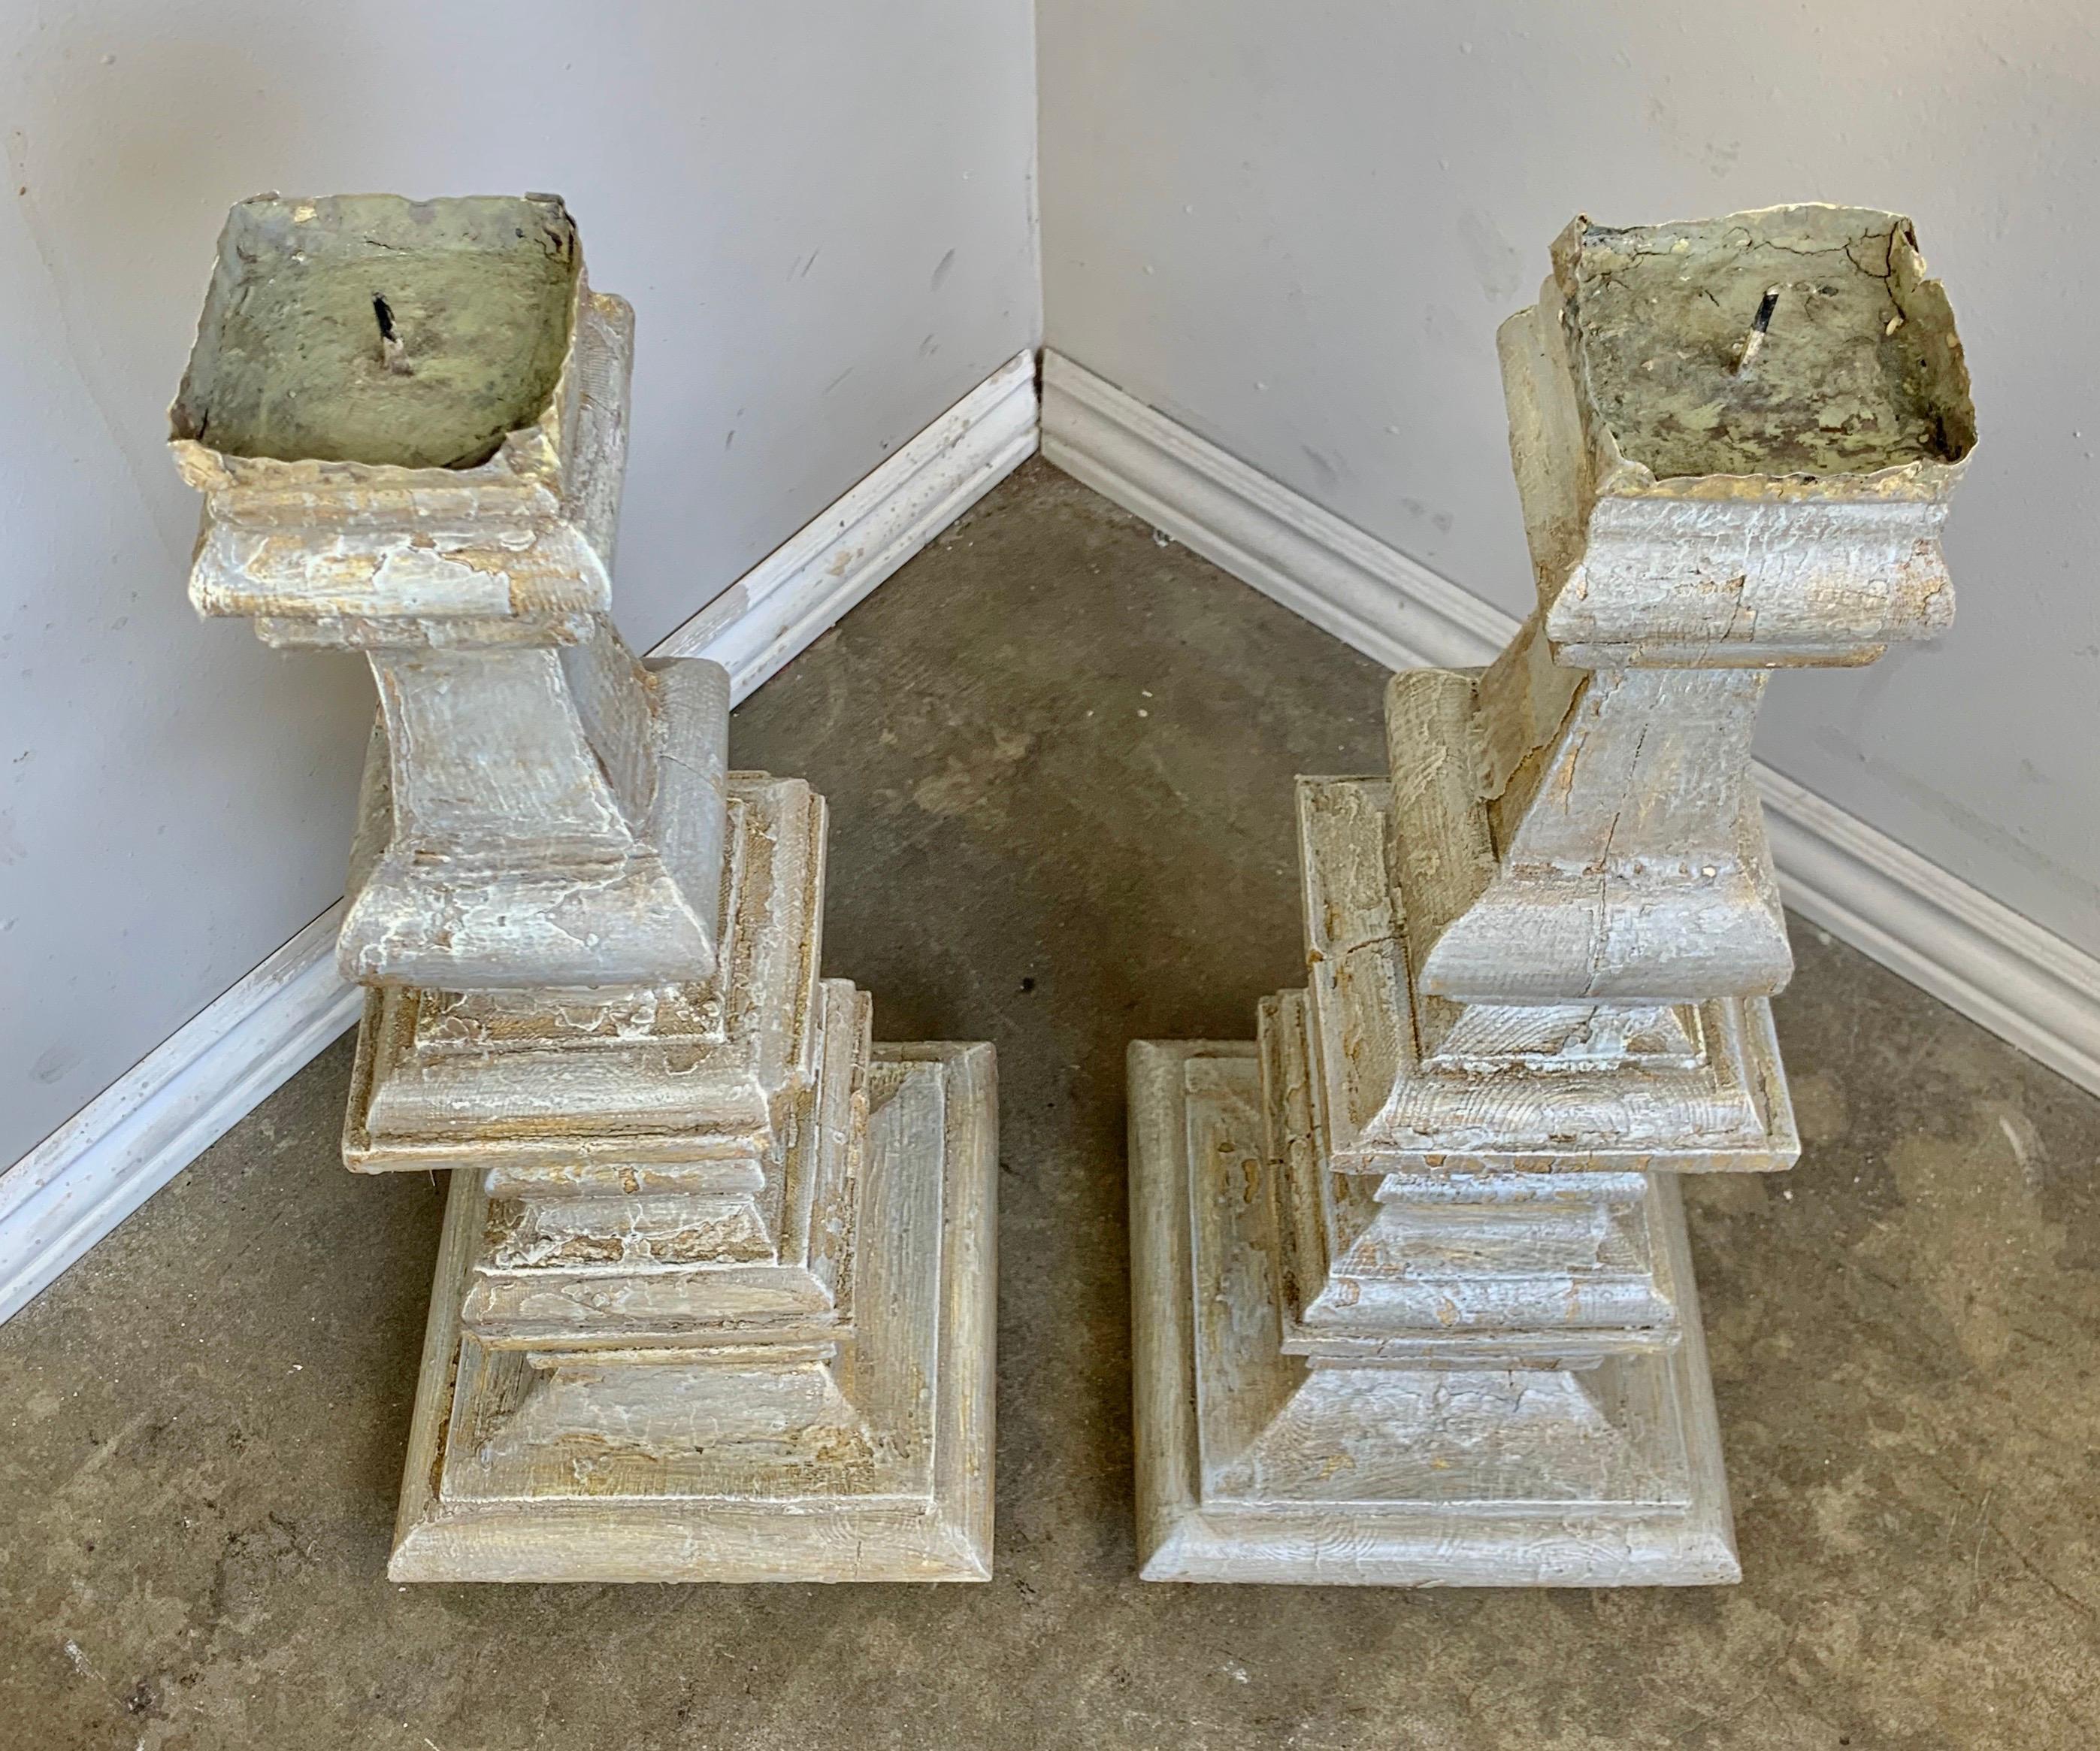 Pair of circa 1920s painted Italian architectural style candlesticks that would work in any decor, both traditional or modern.